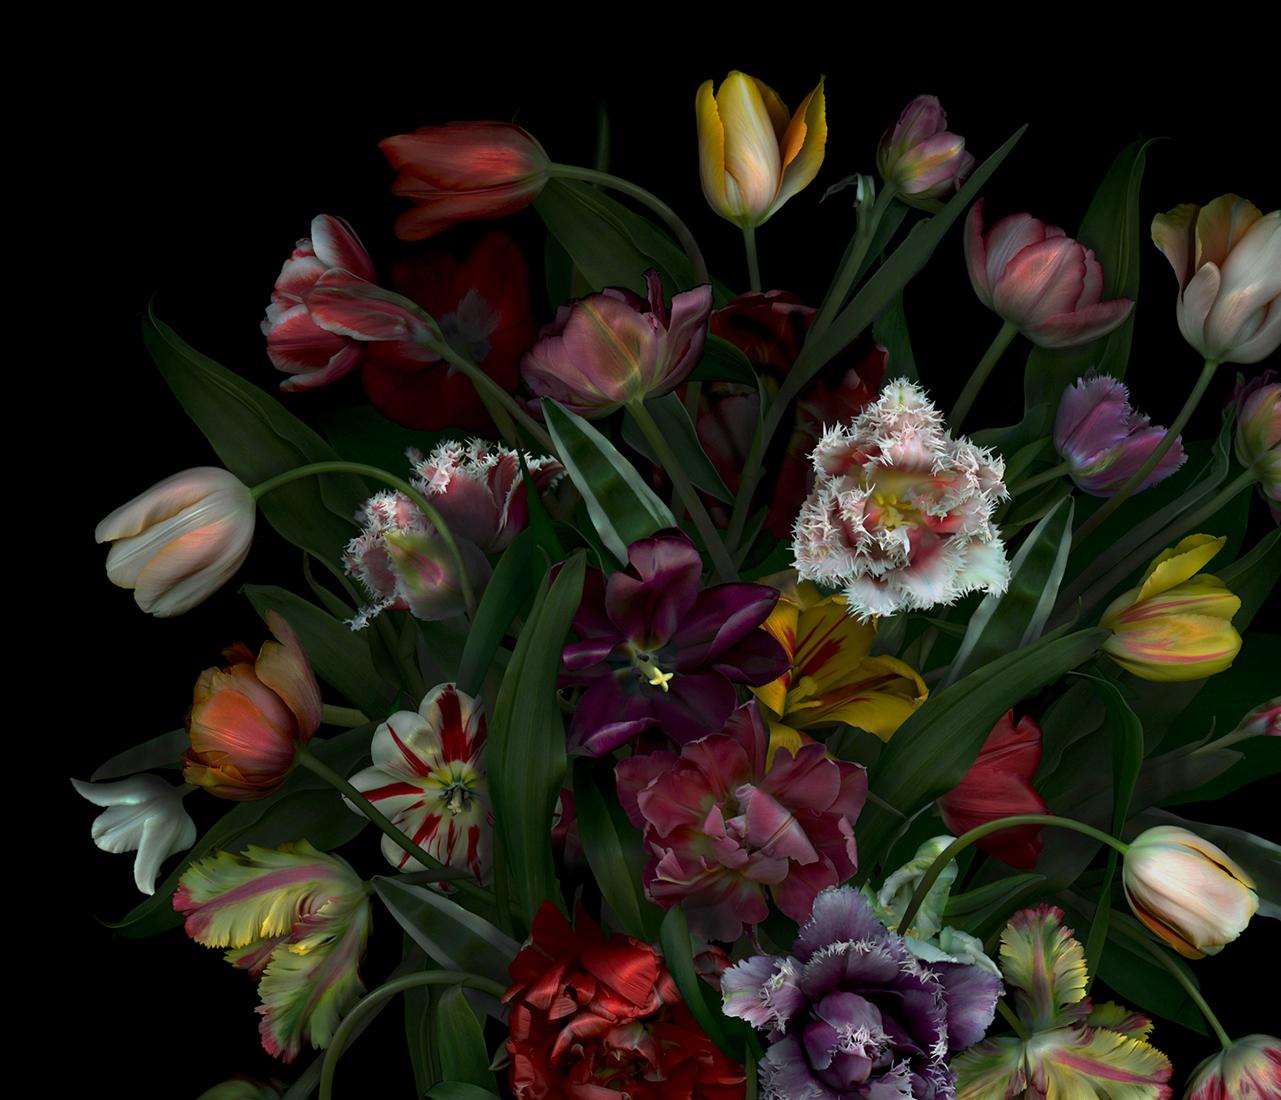 Still Life with Tulips, by Zoltan Gerliczki
From the series 